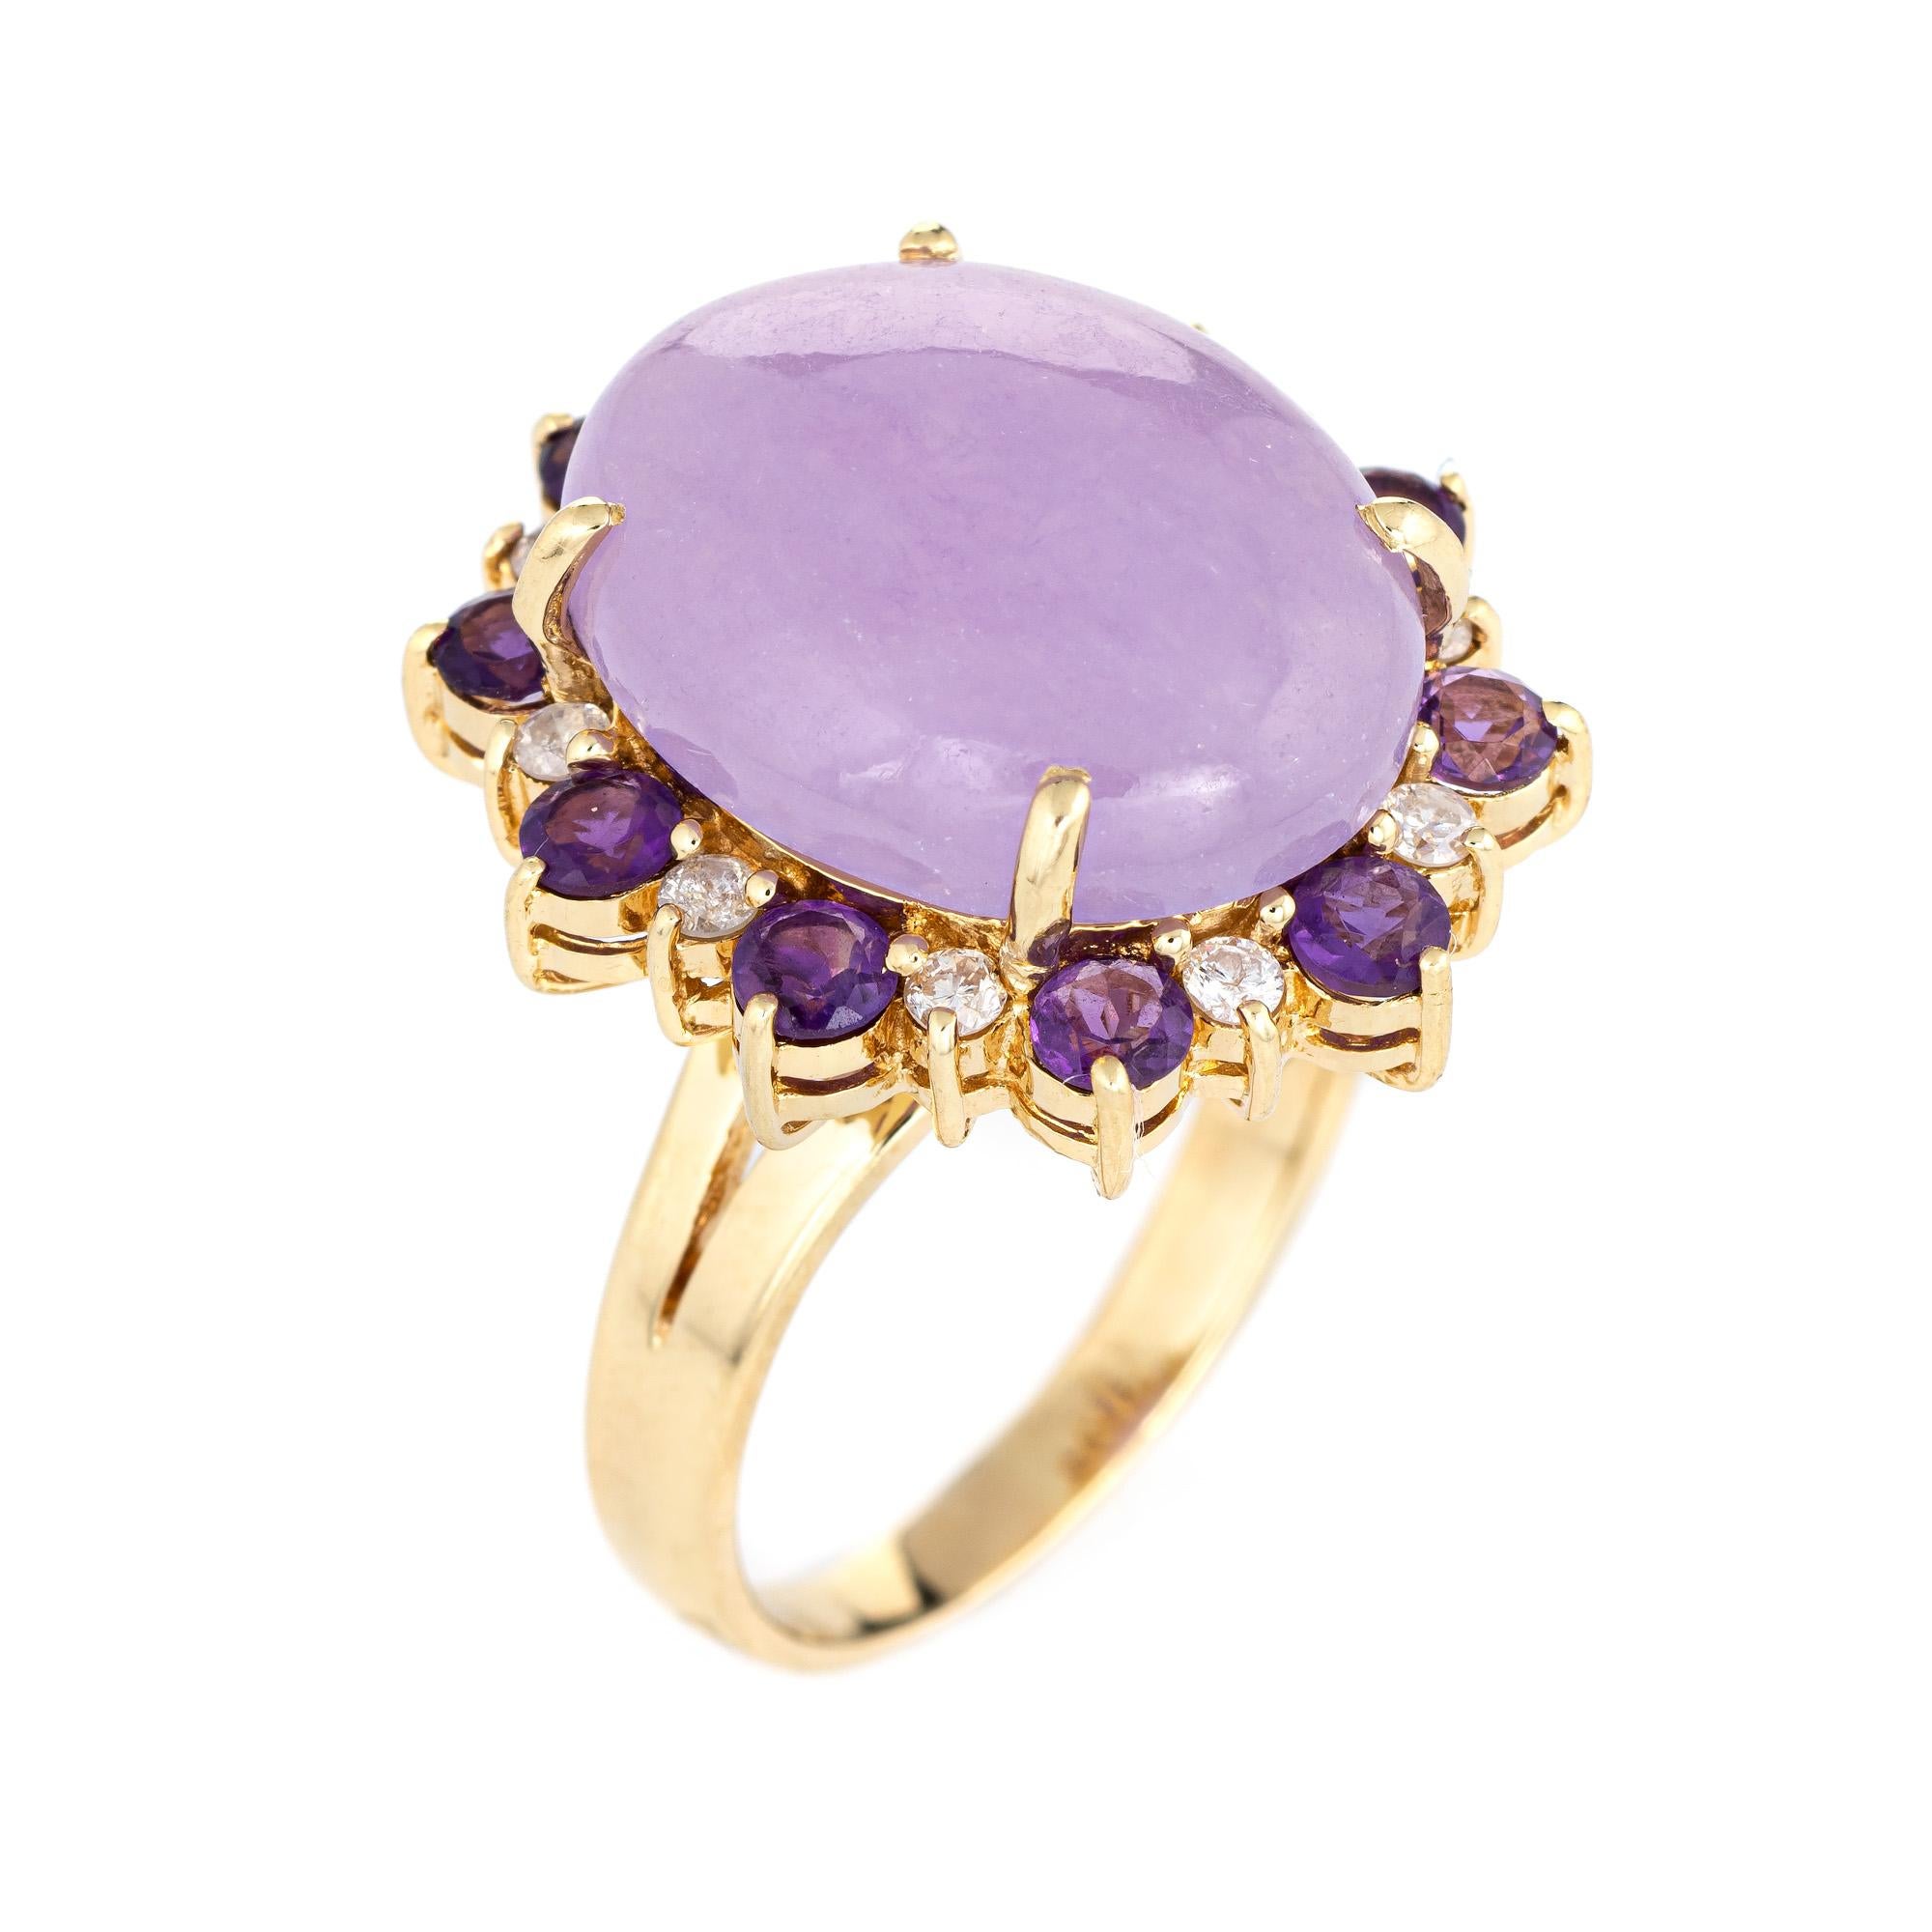 Stylish estate lavender jade, amethyst & diamond cocktail ring crafted in 14 karat yellow gold. 

Cabochon cut lavender jade measures 18mm x 15mm (estimated at 25 carats), accented with an estimated 0.50 carats of amethysts. The diamonds total an